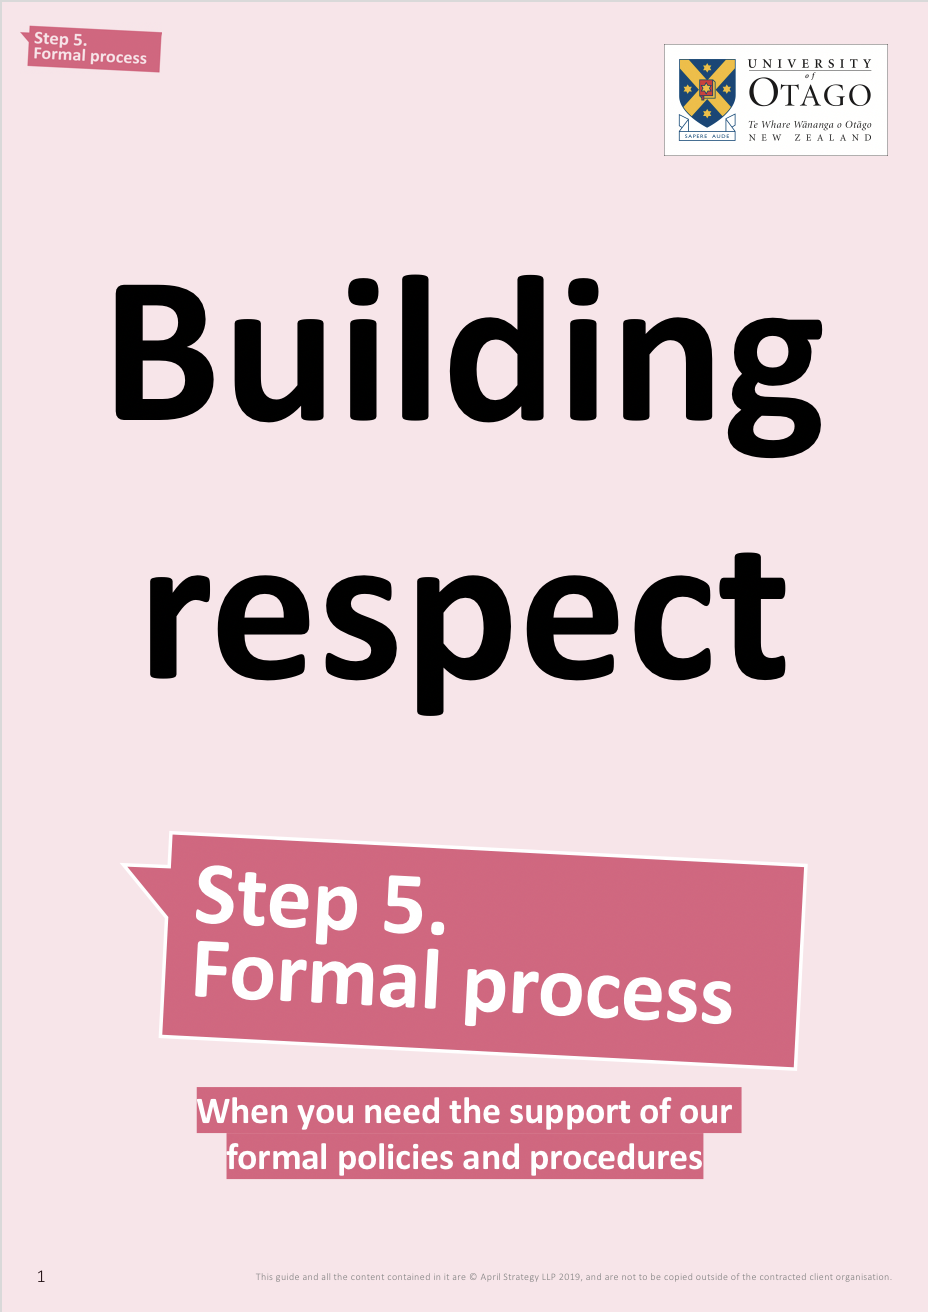 Formal process guide